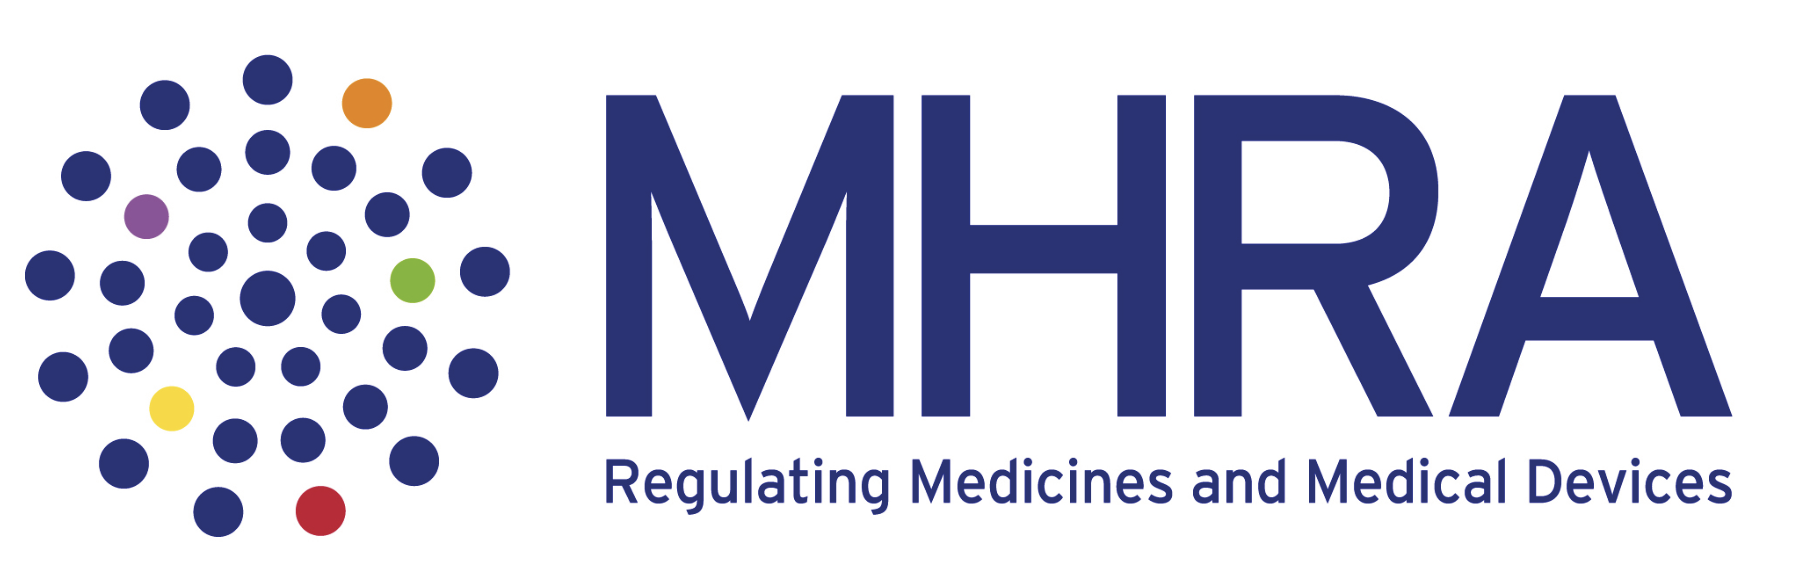 MHRA.png